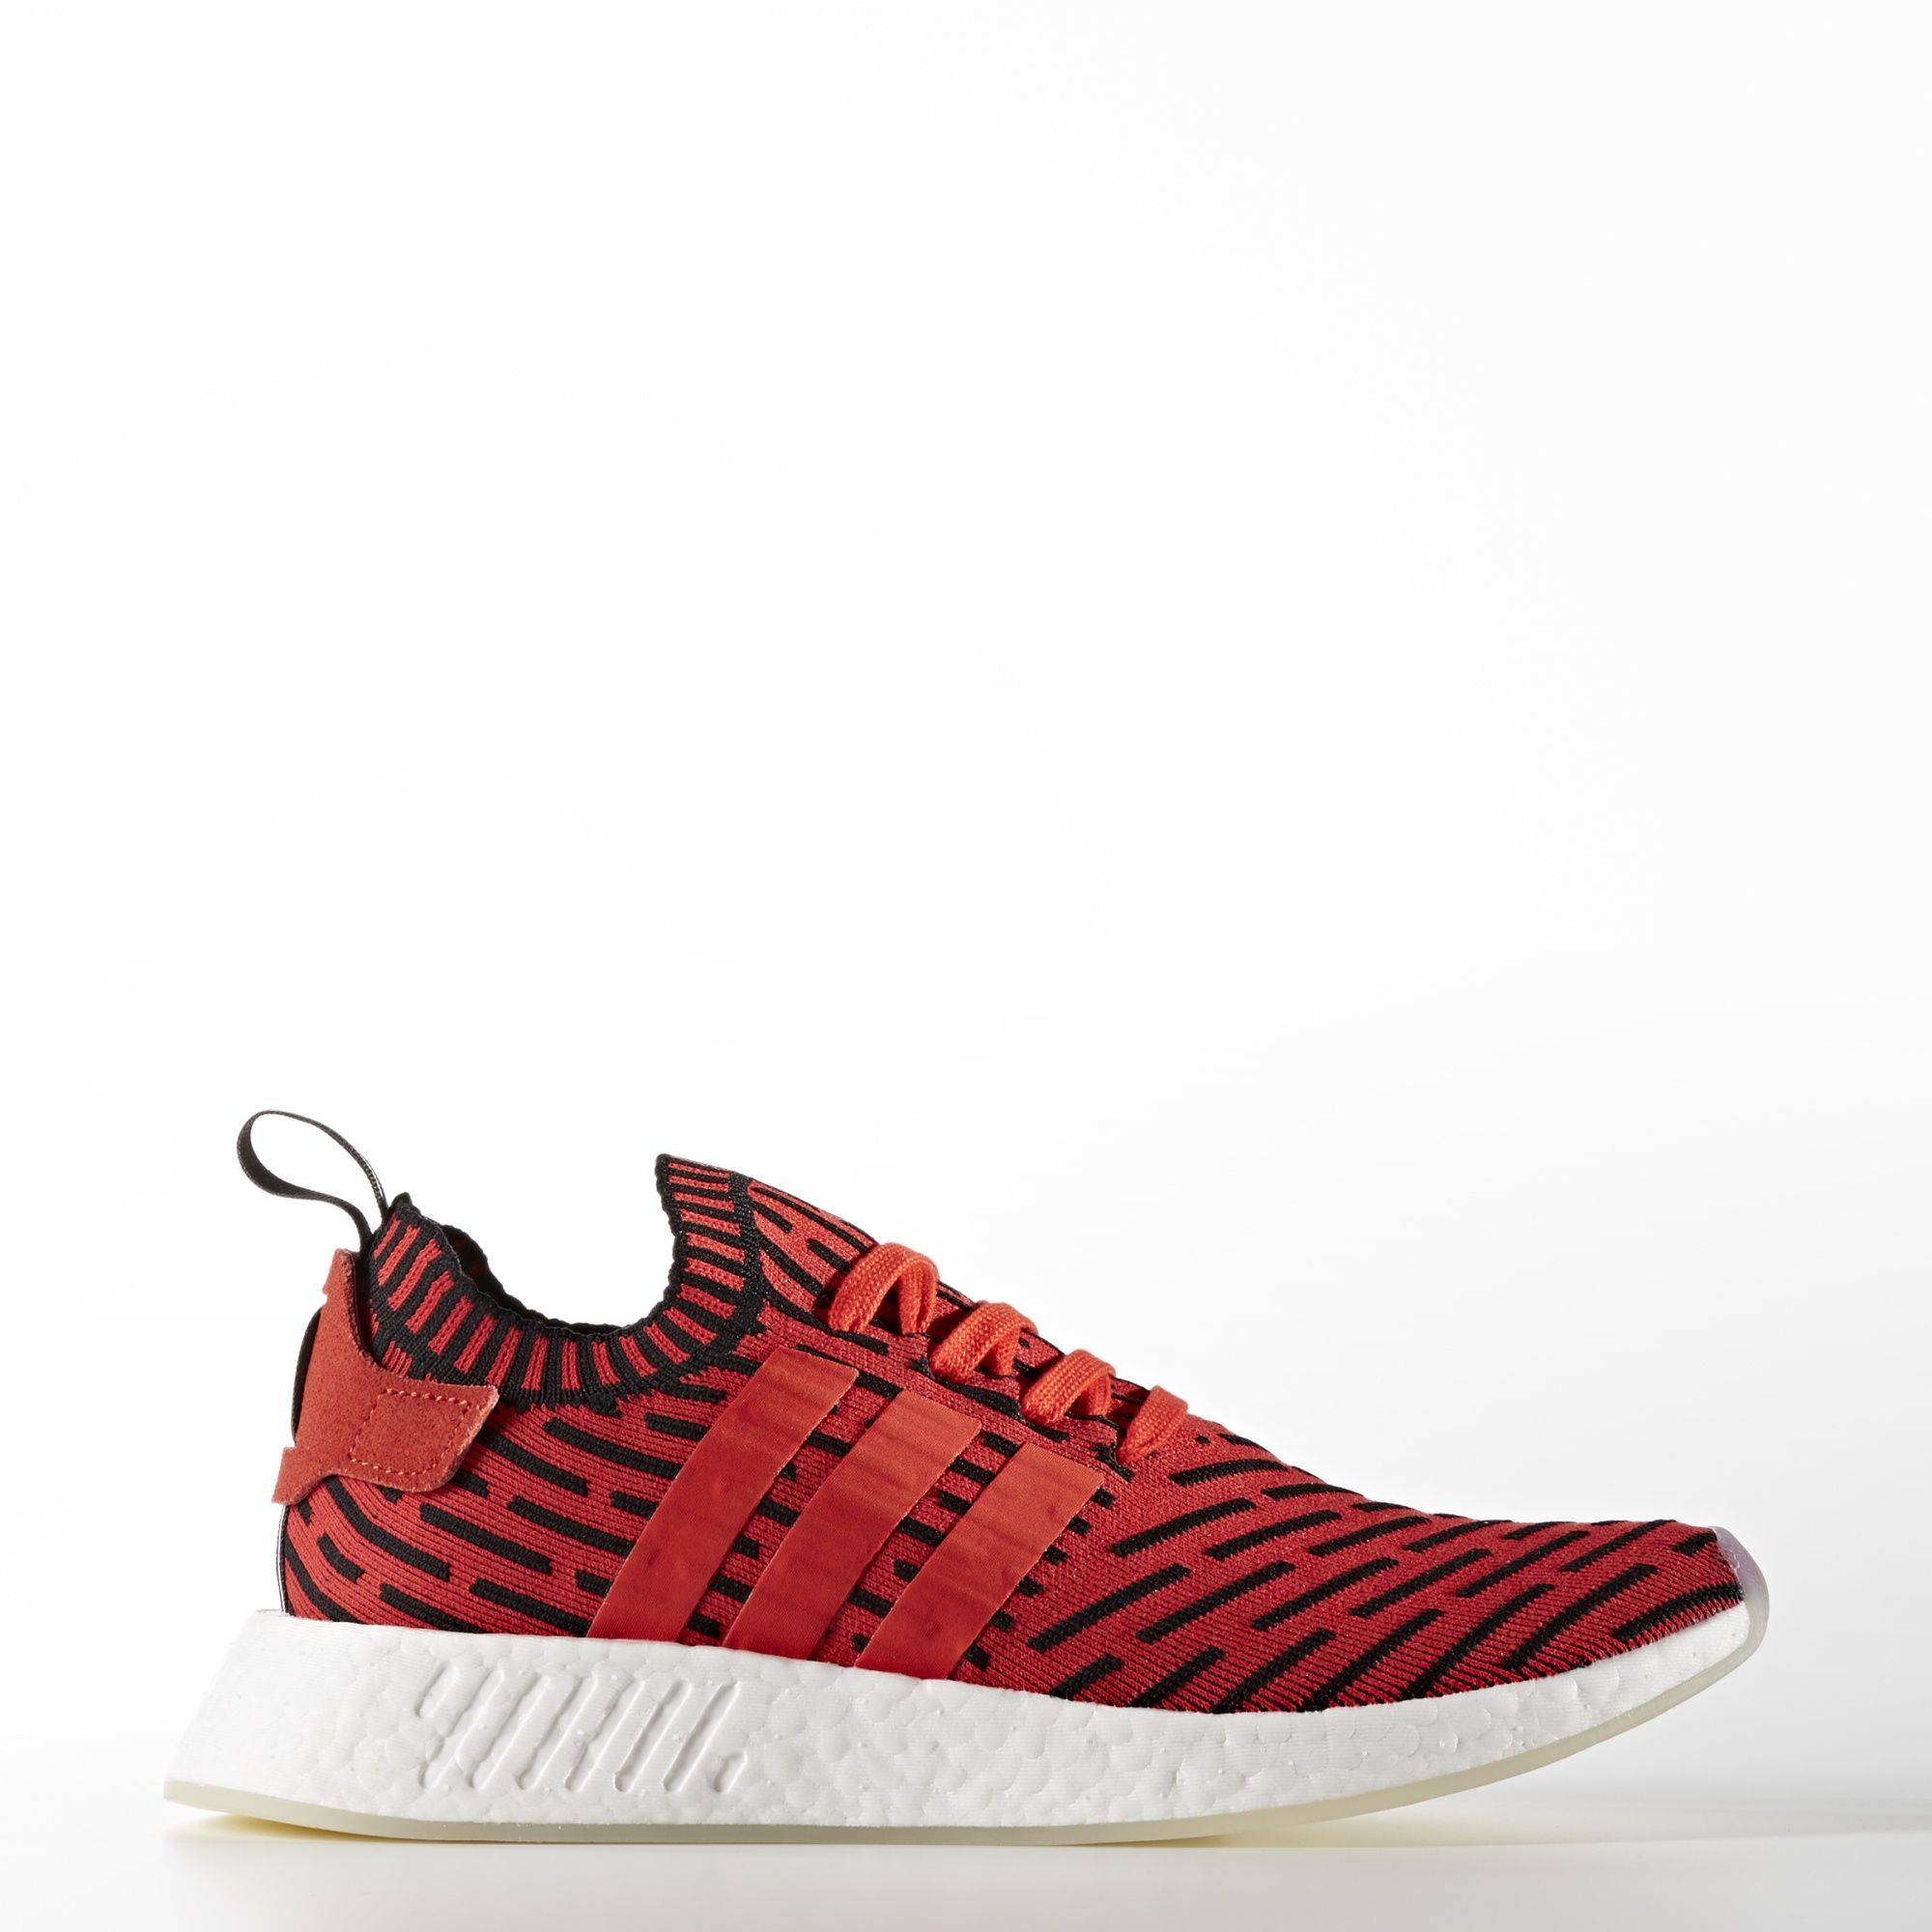 adidas-nmd_r2-pk-core-red-2